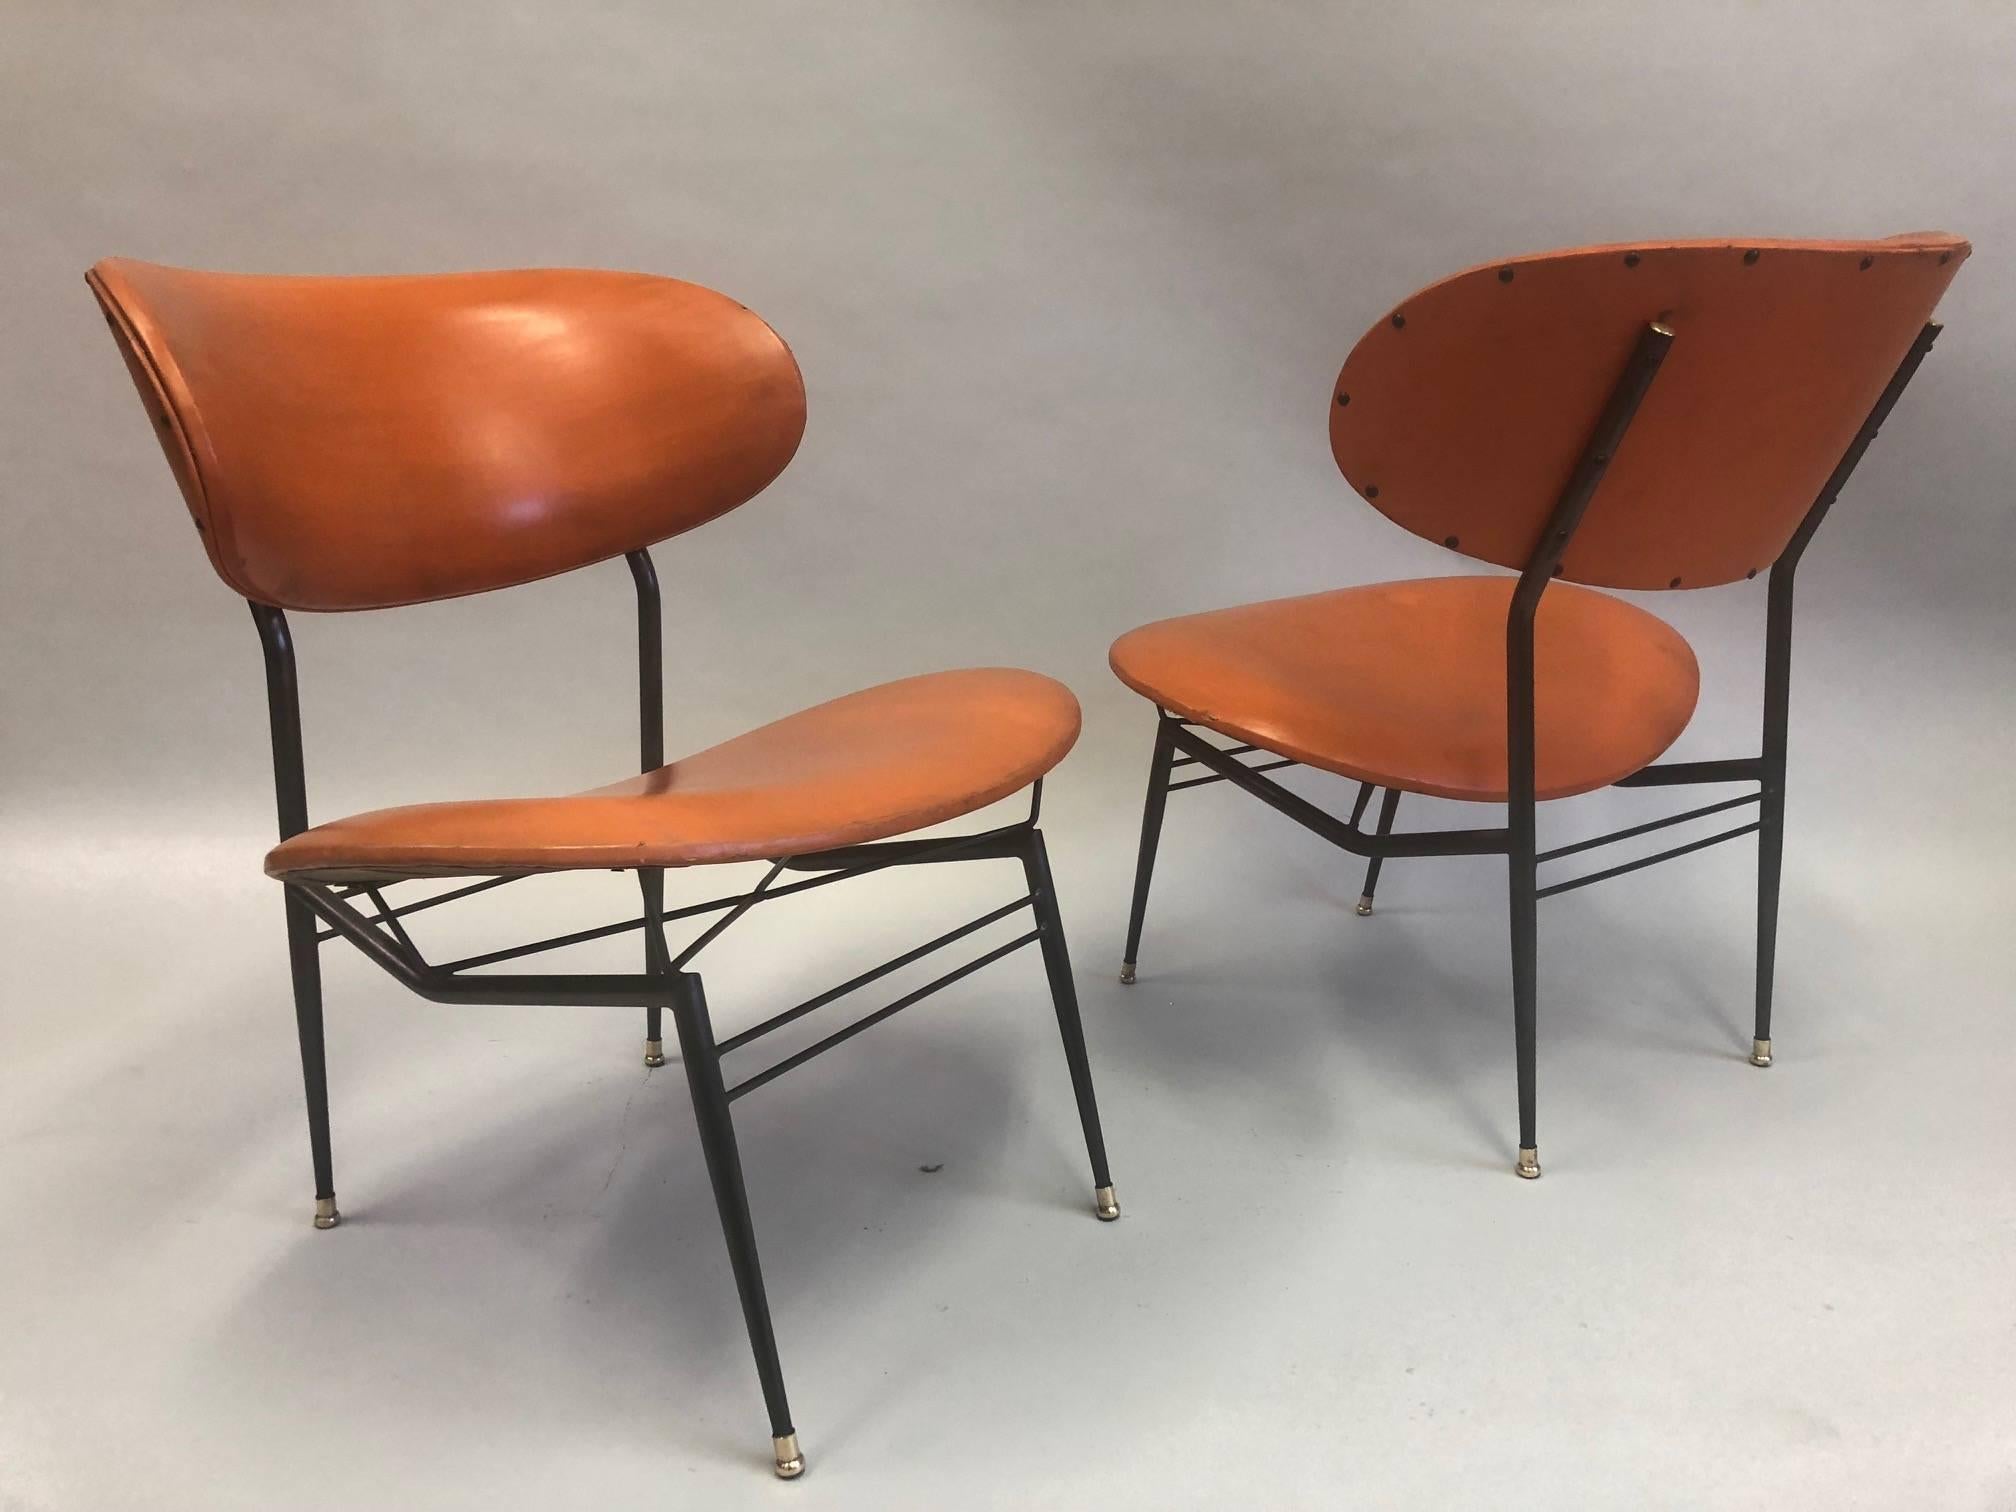 Two pairs of Important Italian Mid-Century Modern lounge chairs / armchairs / slipper chairs by Gastone Rinaldi. These stunning.pieces have a rare, architectural presence and are composed of an enameled steel frame finished with brass caps on the